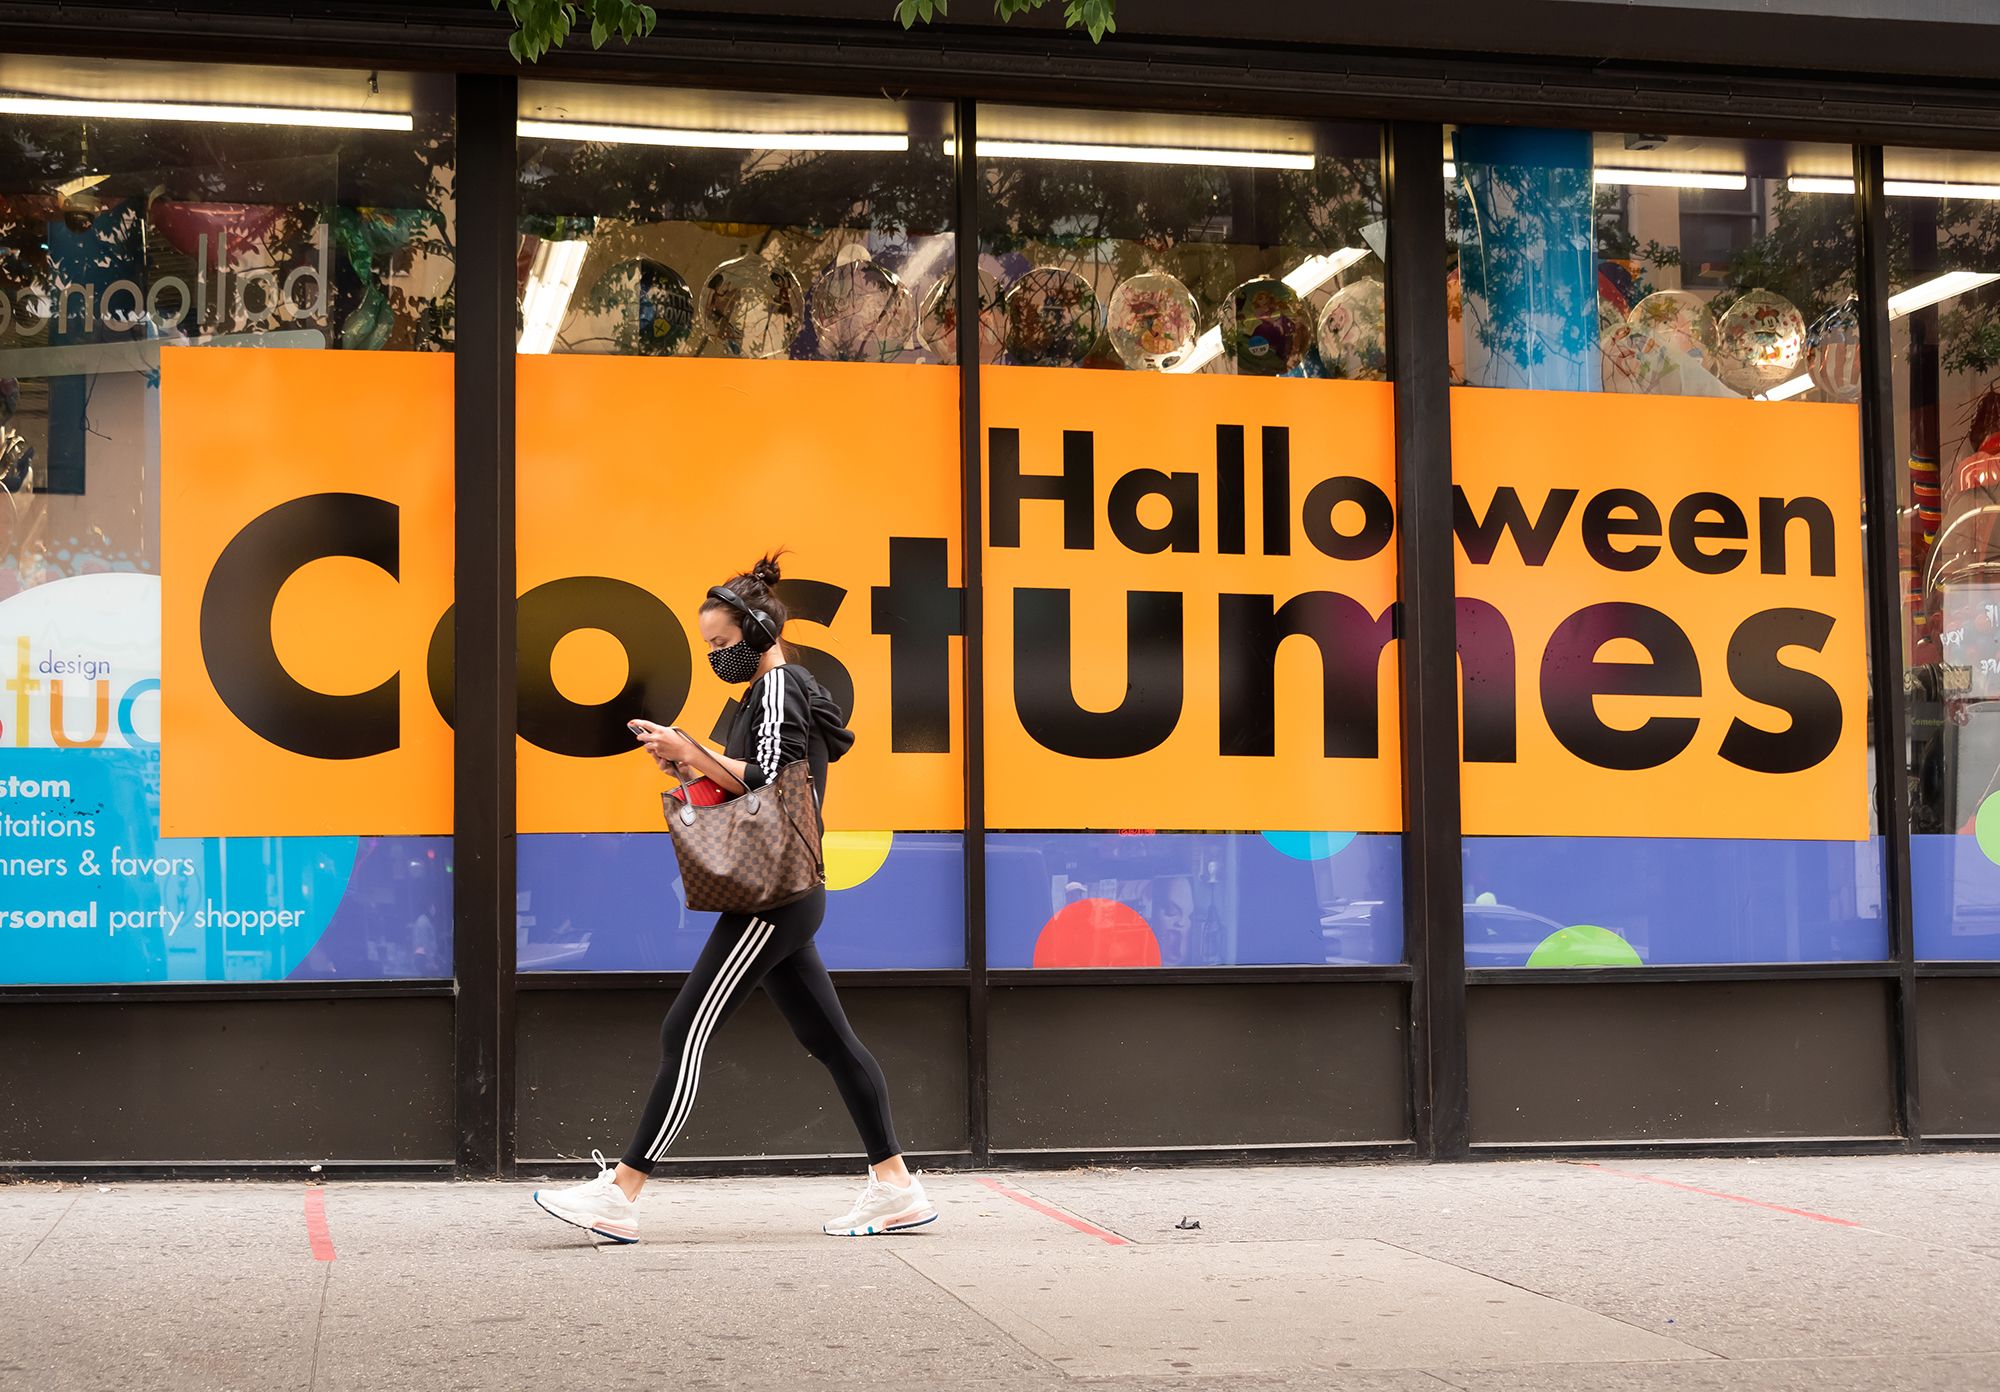 Party City is hiring 20,000 people, expecting an epic Halloween